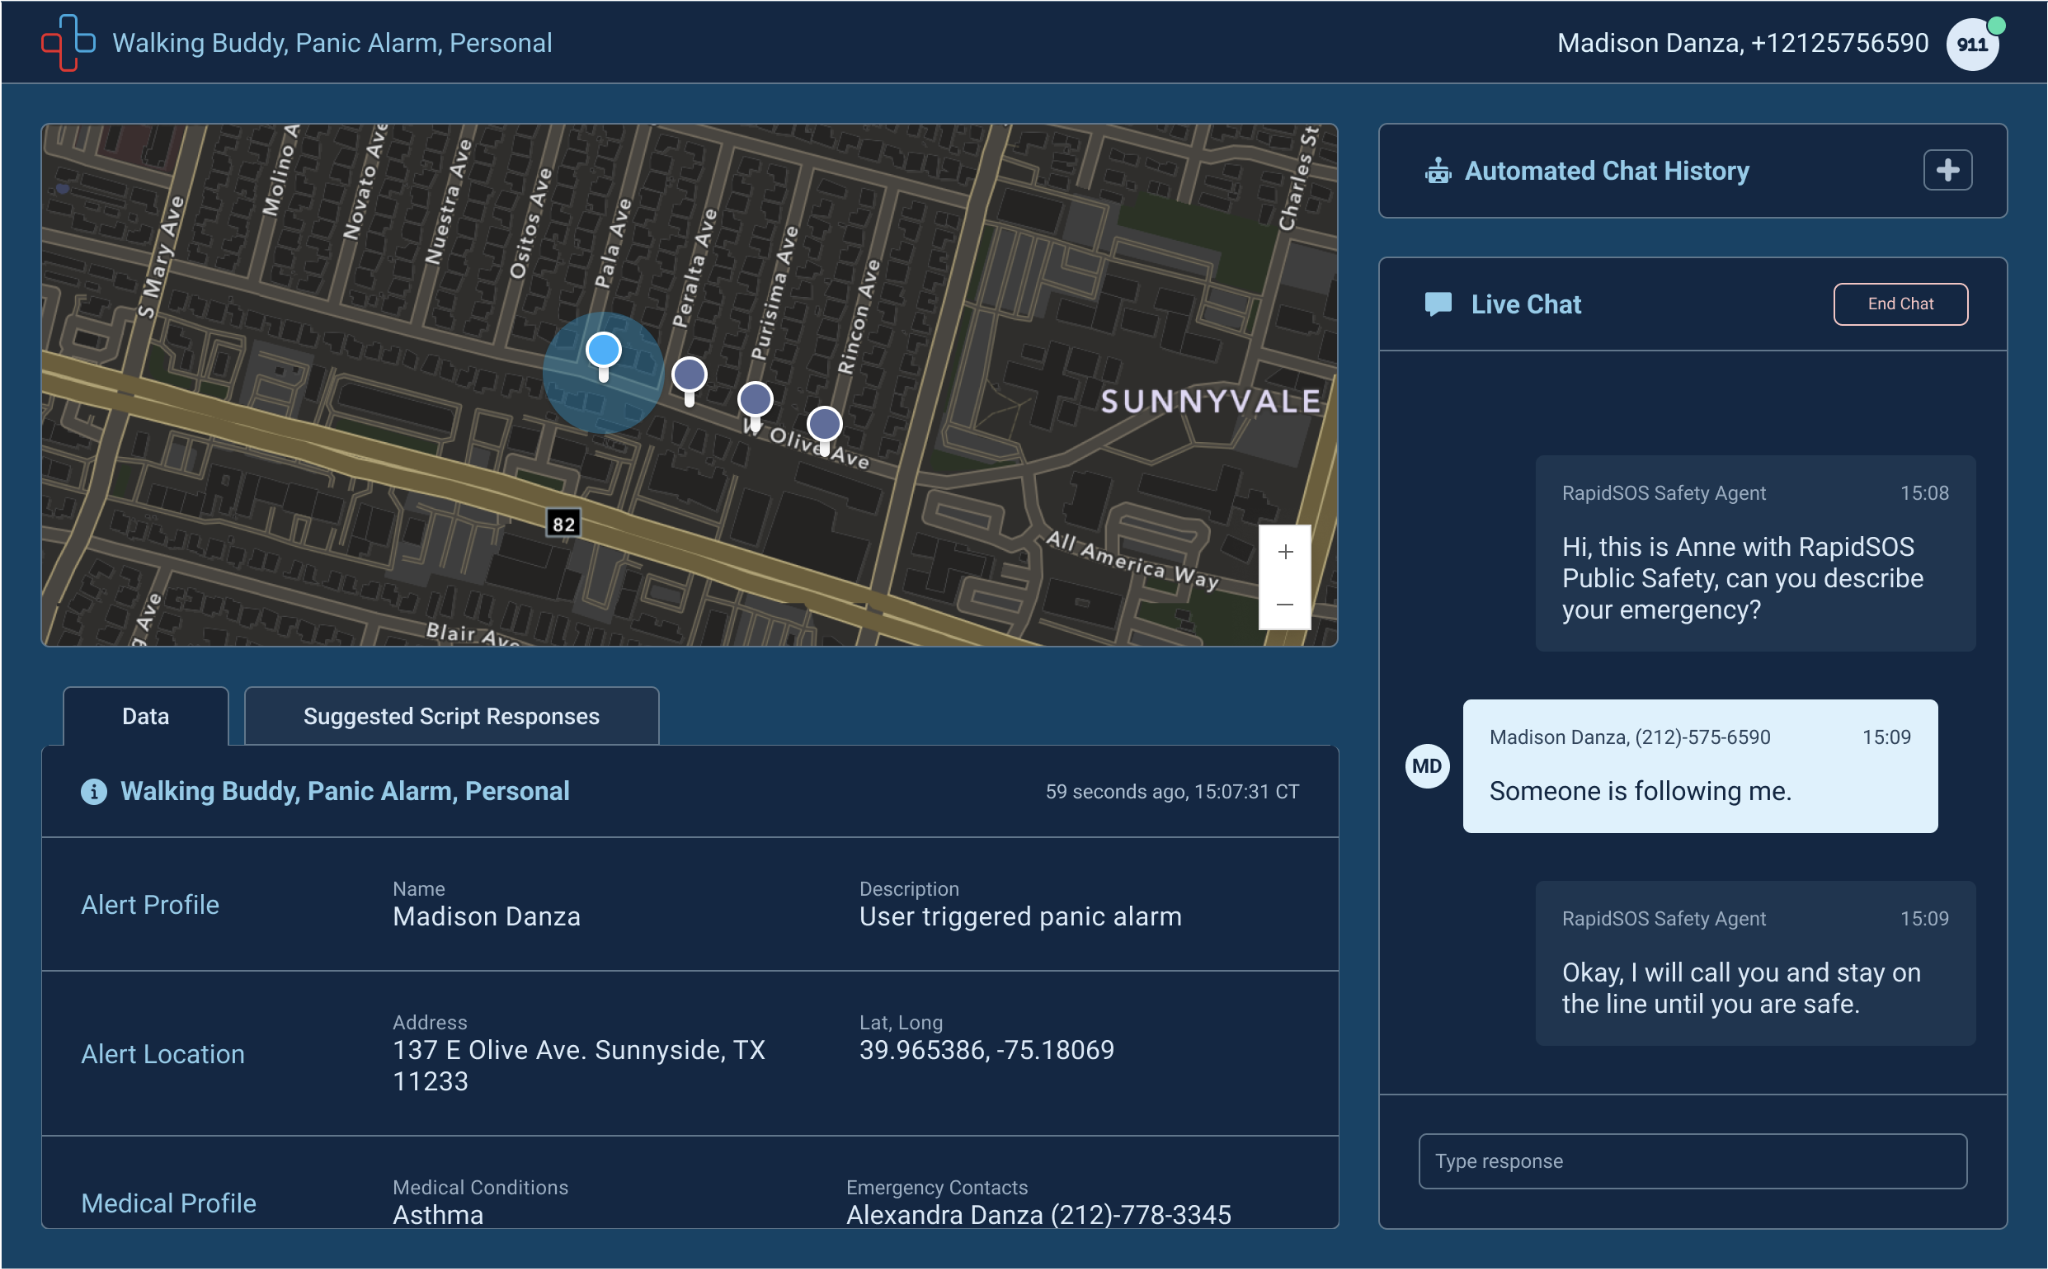 RapidSOS dashboard with the title “Walking Buddy, Panic Alarm, Personal” in the top left, and contact details for a person in the top right. A street map shows multiple pins with one location circled. In the bottom left there’s a list with data points for this contact. In the right hand panel is a view of a live chat.